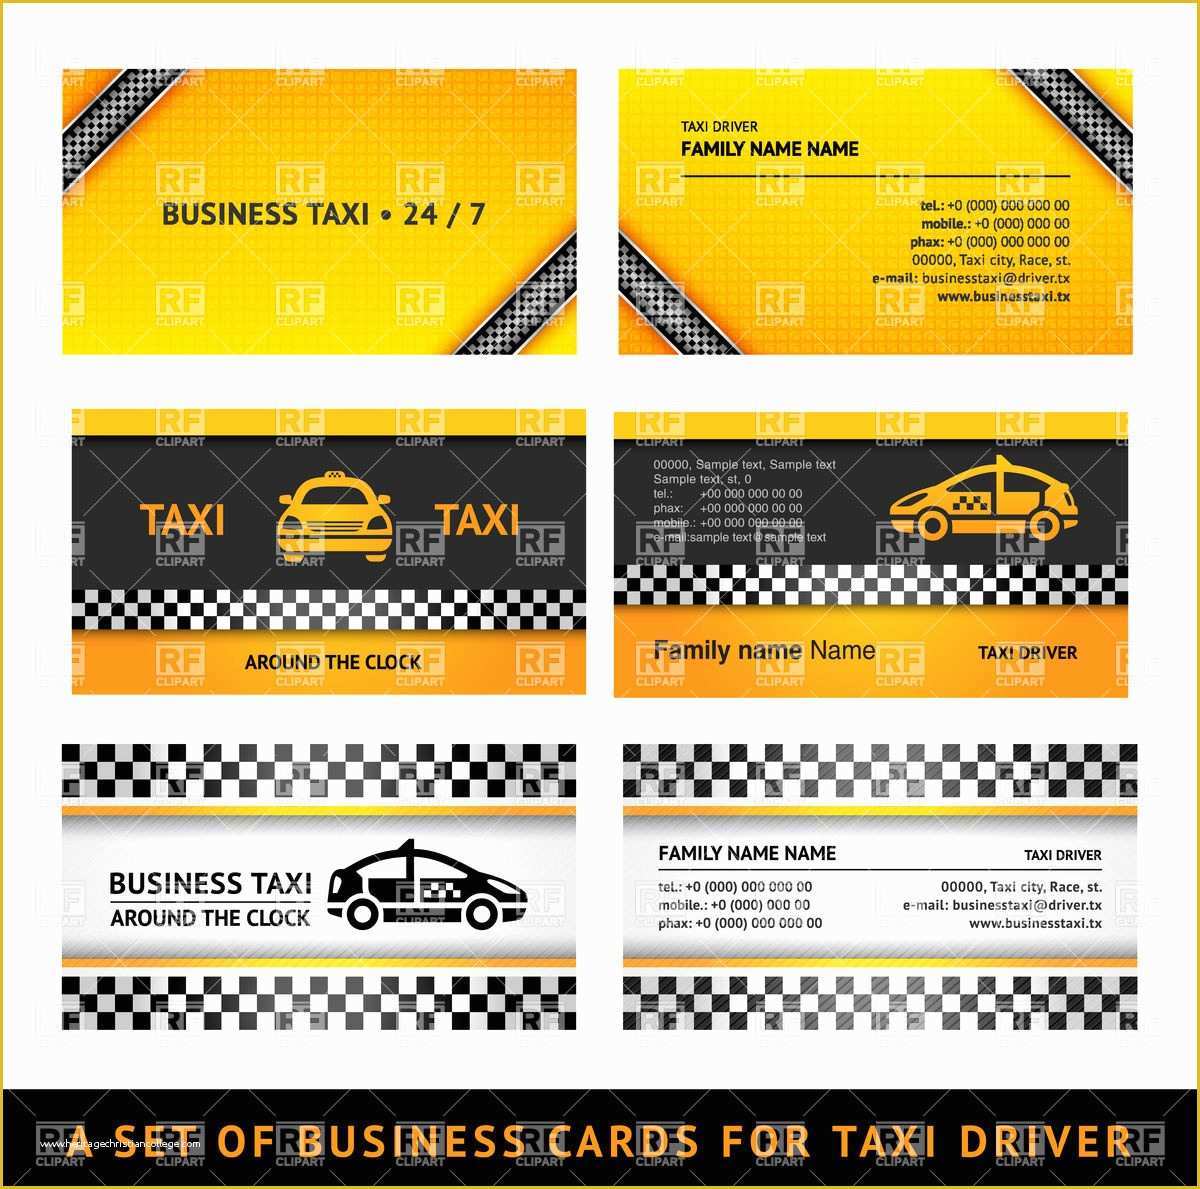 Taxi Business Cards Templates Free Download Of Business Card Templates for Taxi Service Royalty Free